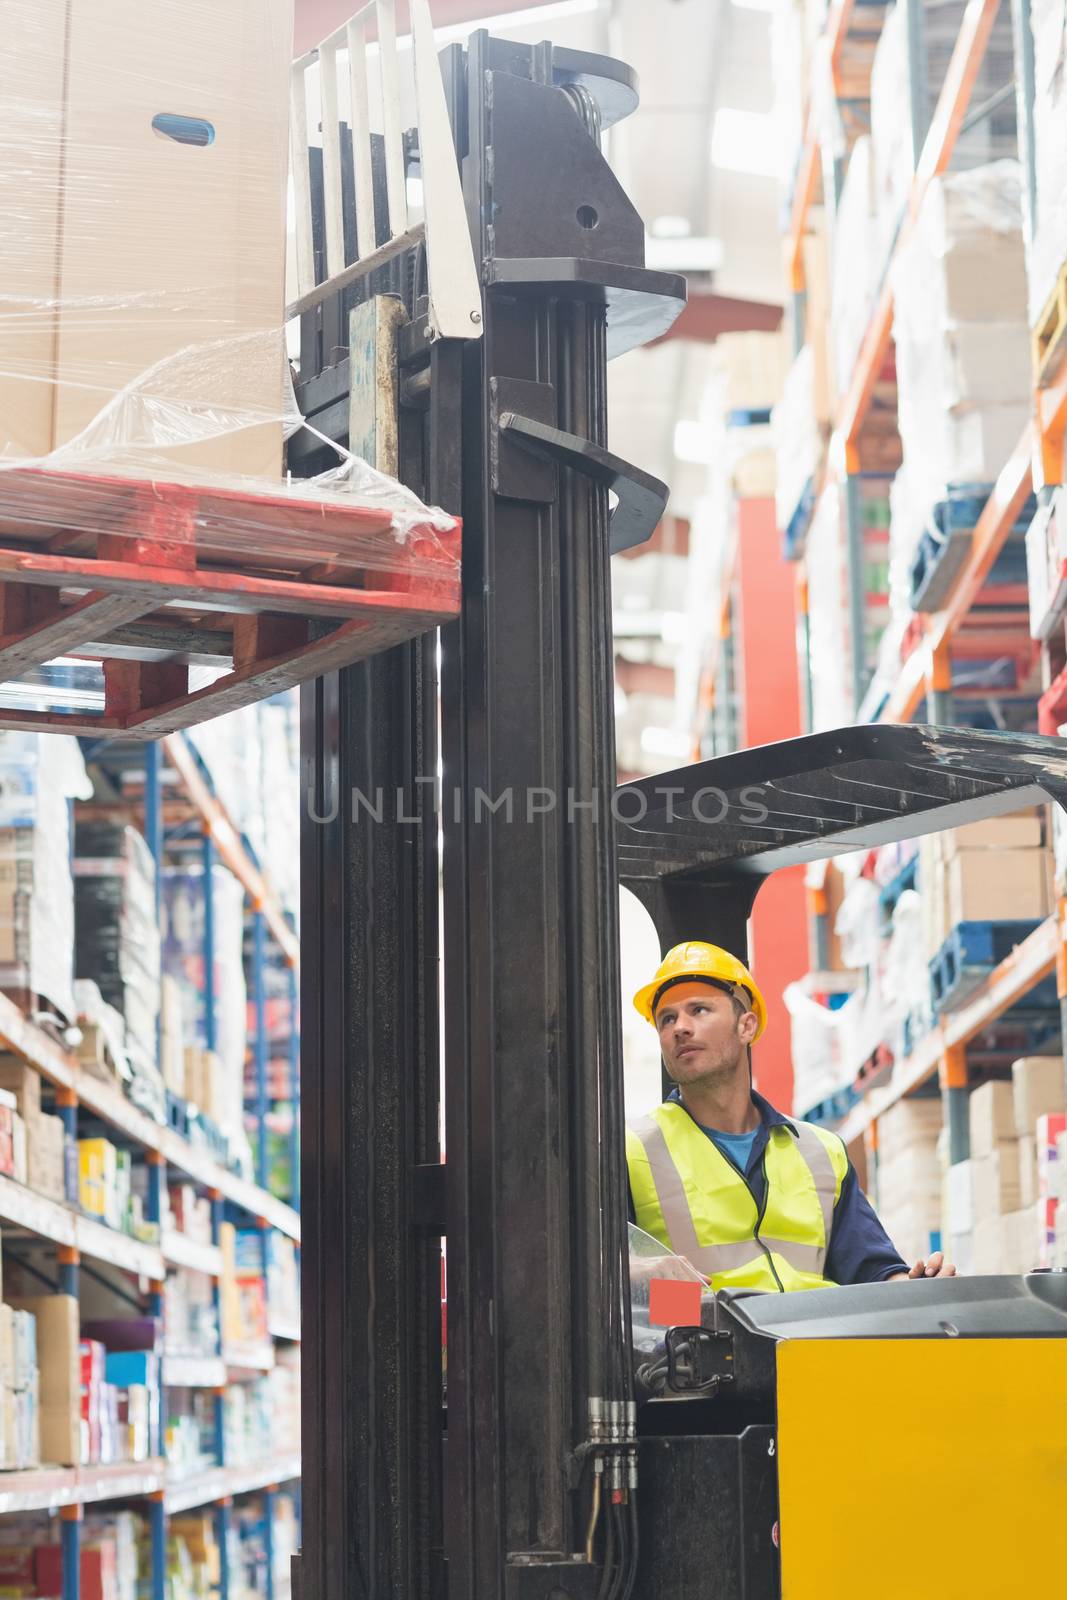 Focused driver operating forklift machine in warehouse